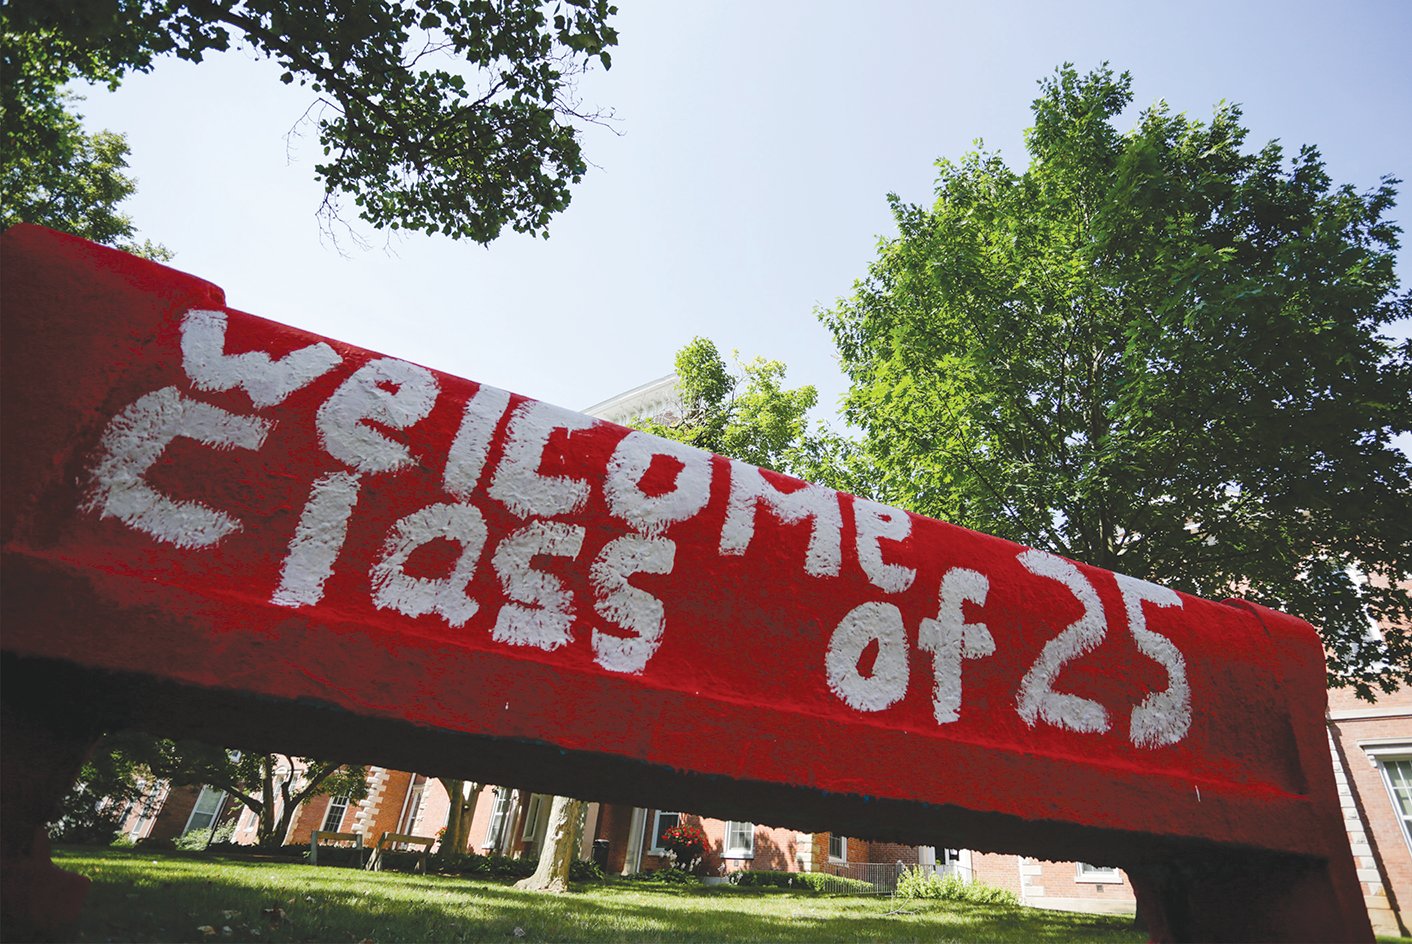 The Senior Bench is painted to welcome the Wabash College Class of 2025.